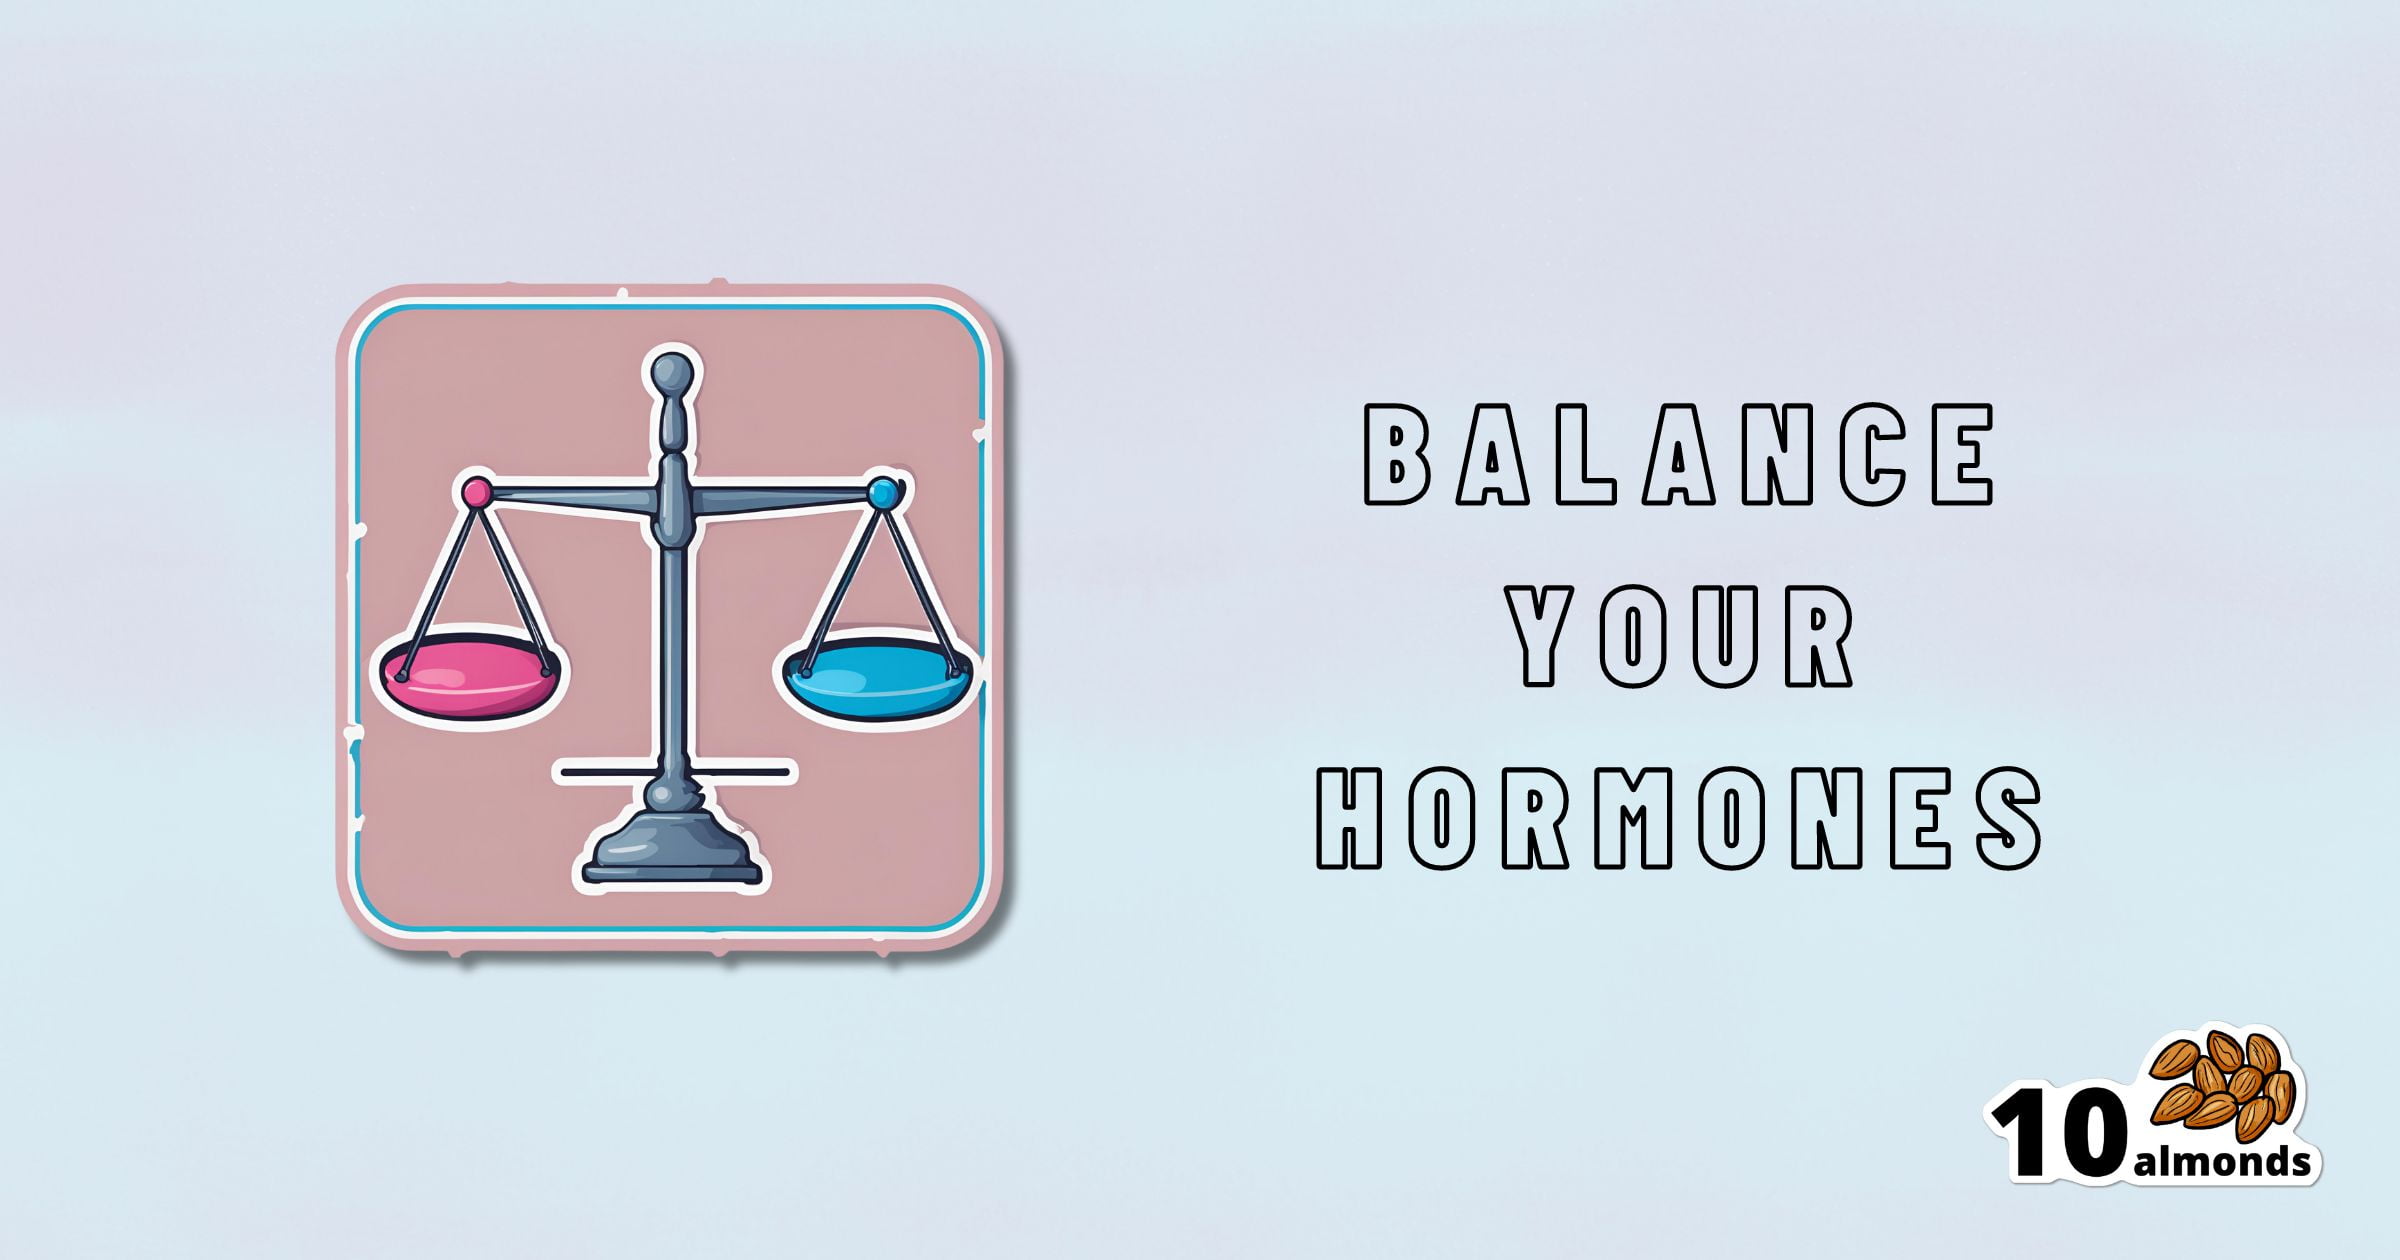 A digital image shows a pink and blue balance scale icon on the left. The text "Balance Your Hormones Naturally" is on the right. In the bottom right corner, an image of 10 almonds with the number "10" above them is displayed. Dr. Kim Foster's tips are perfect for balancing hormones effortlessly.